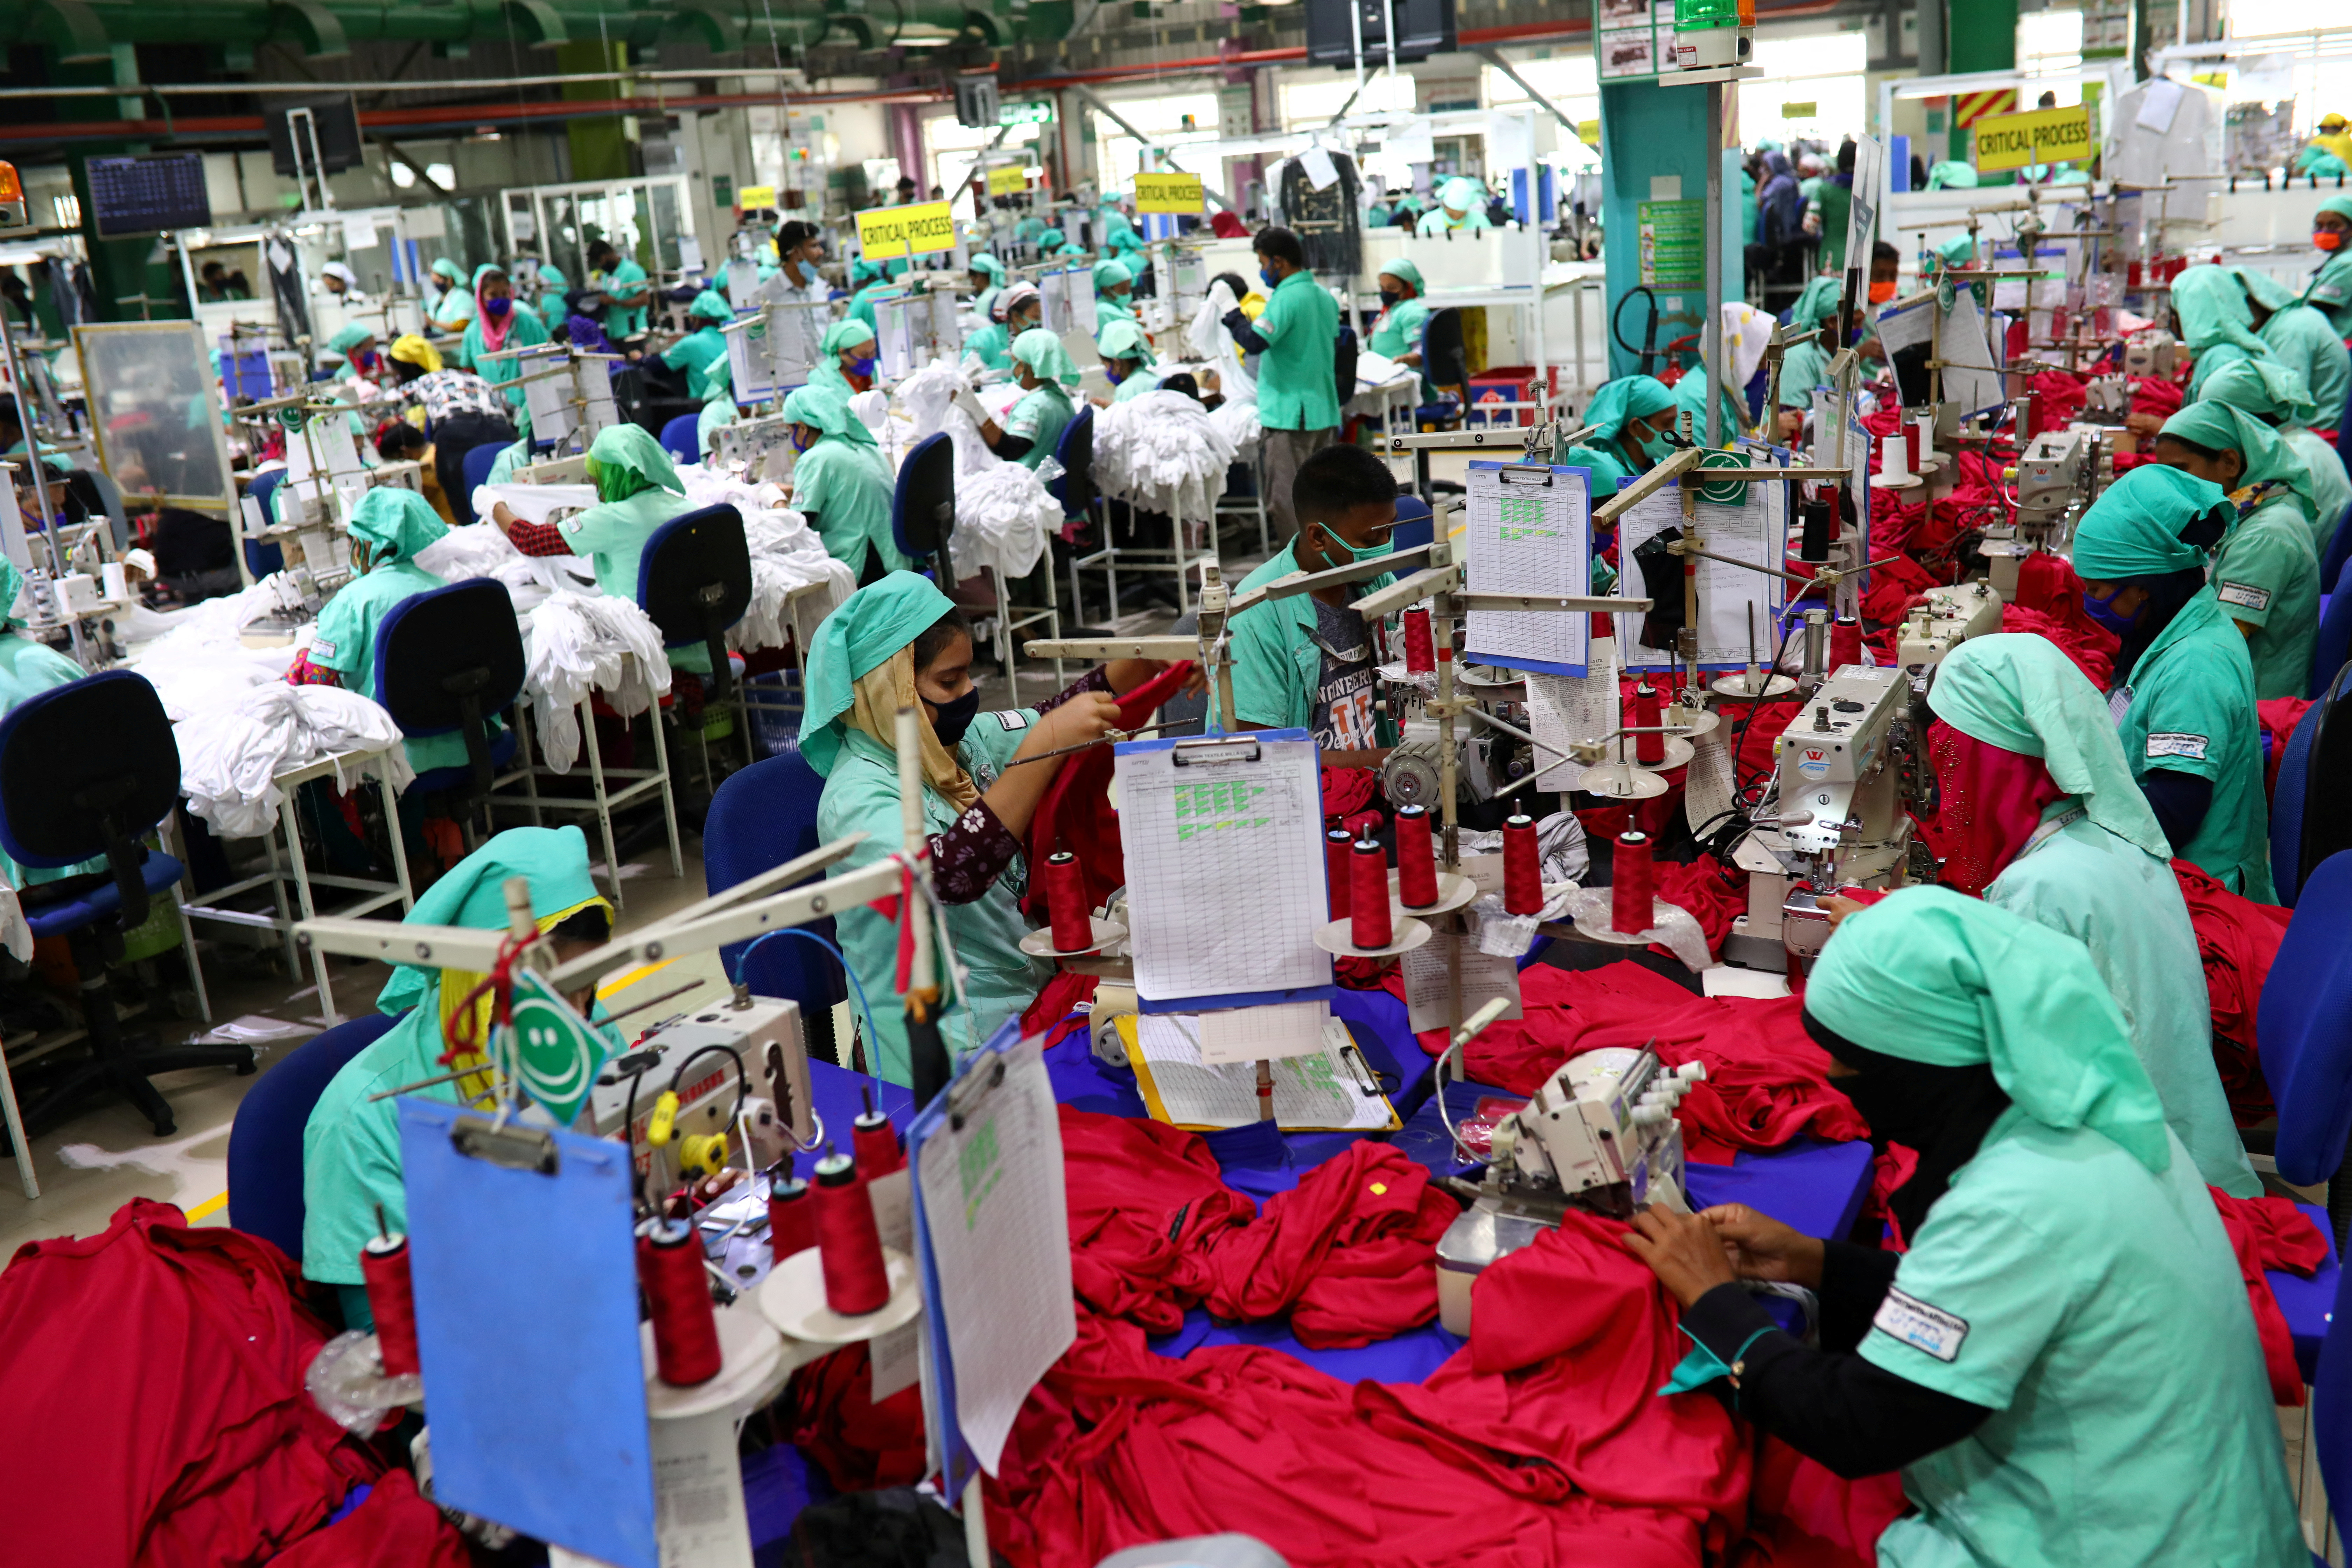 Garment employees work in a sewing section of the Fakhruddin Textile Mills Limited in Gazipur